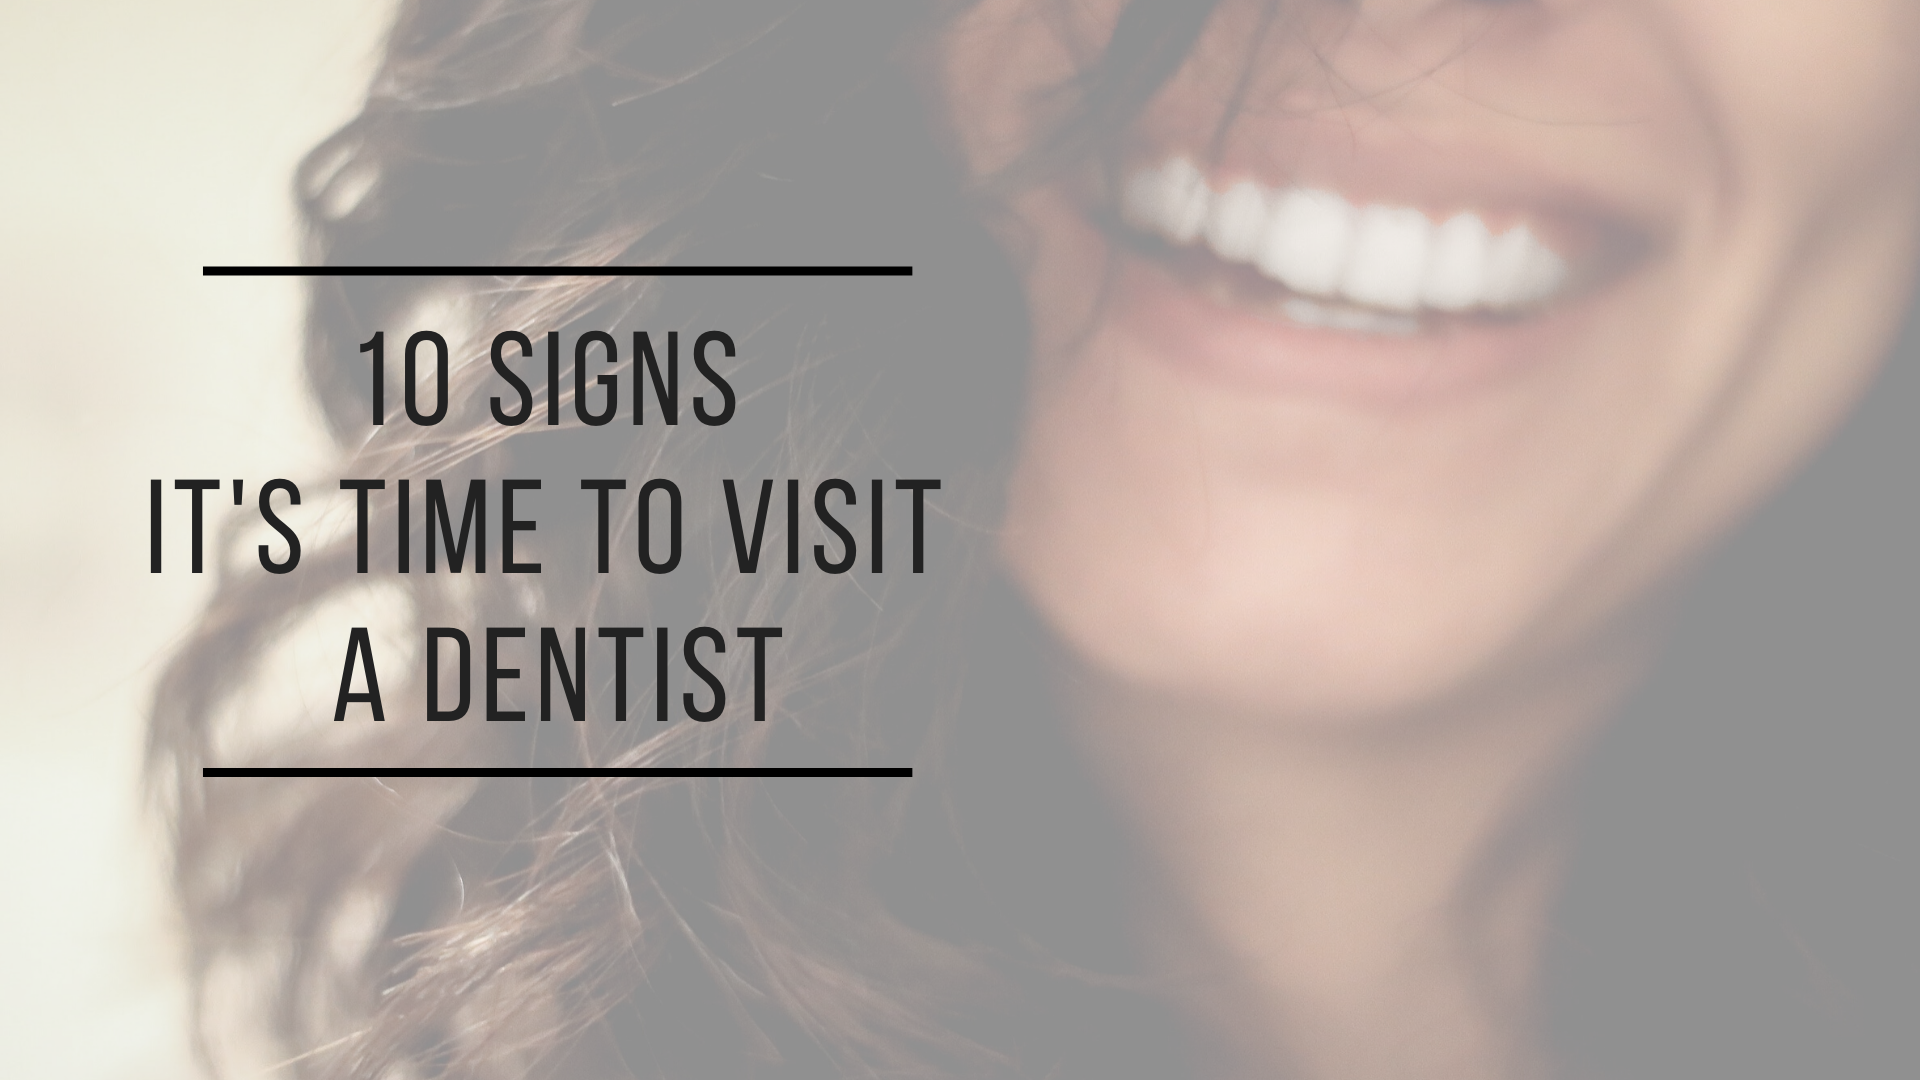 Madison Dentist | 10 Signs It’s Time To Visit A Dentist